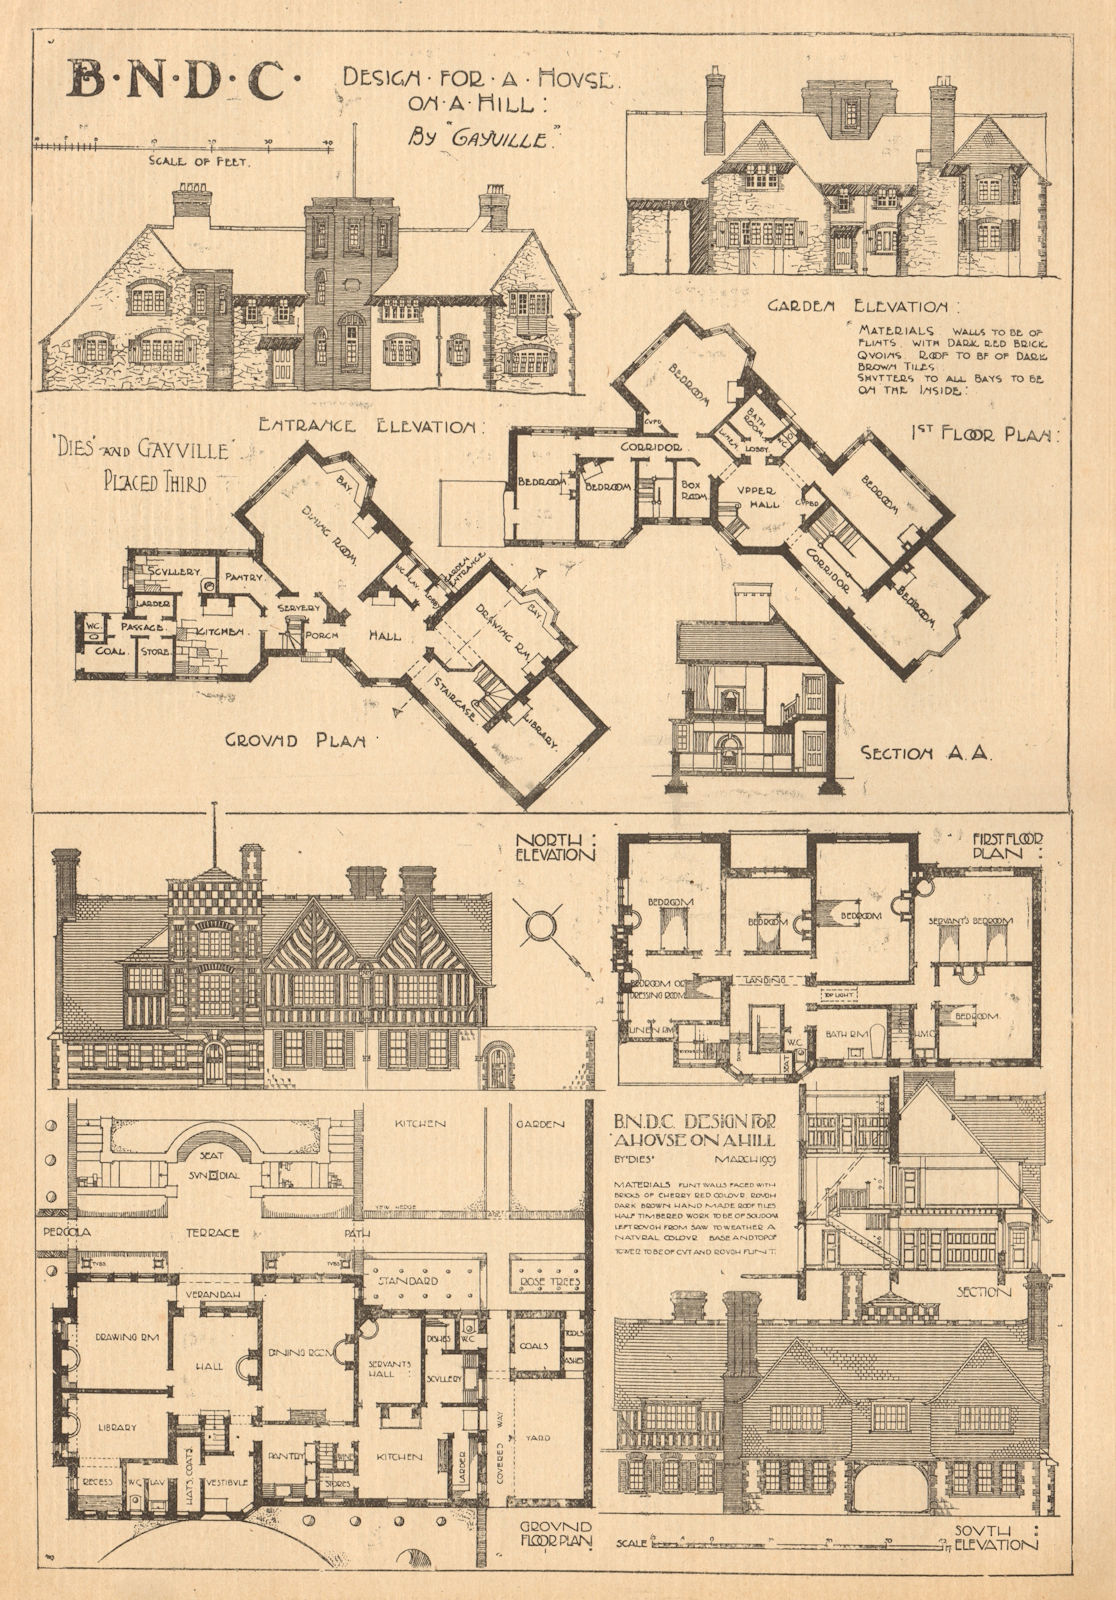 Associate Product Designs for a house on a hill by Gayville & Dies. Elevations & plans 1905